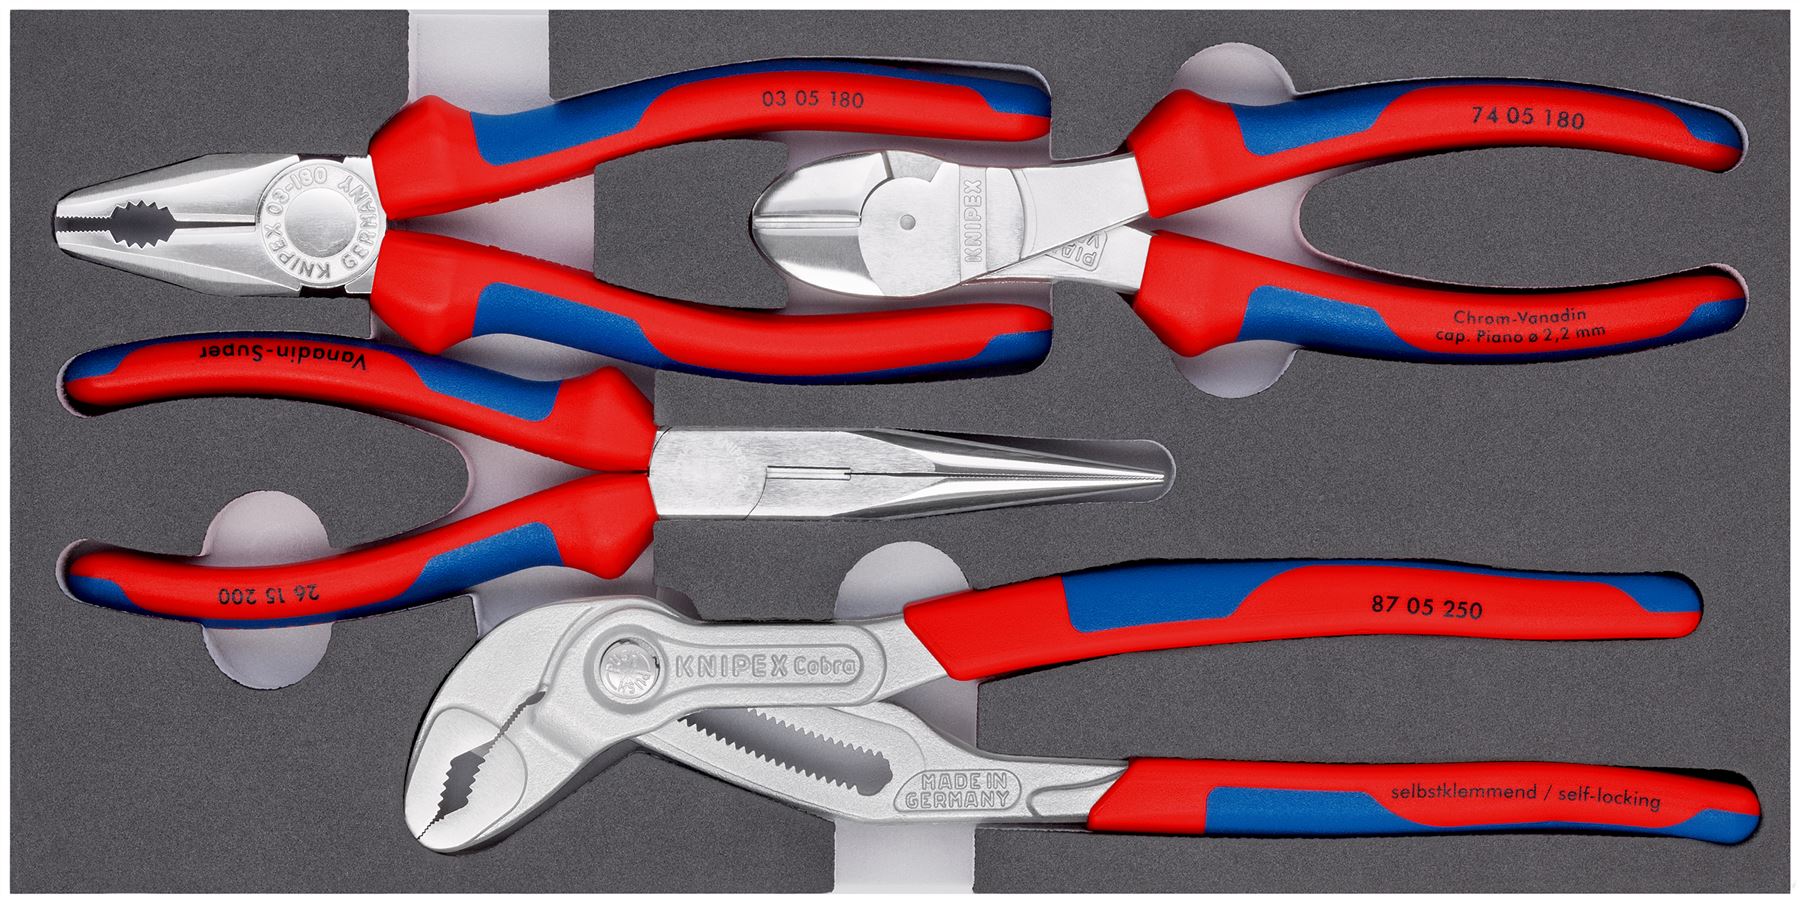 Knipex Set of Pliers in Foam Tray 4 Piece Multi Component Grips Chrome Plated 00 20 01 V17